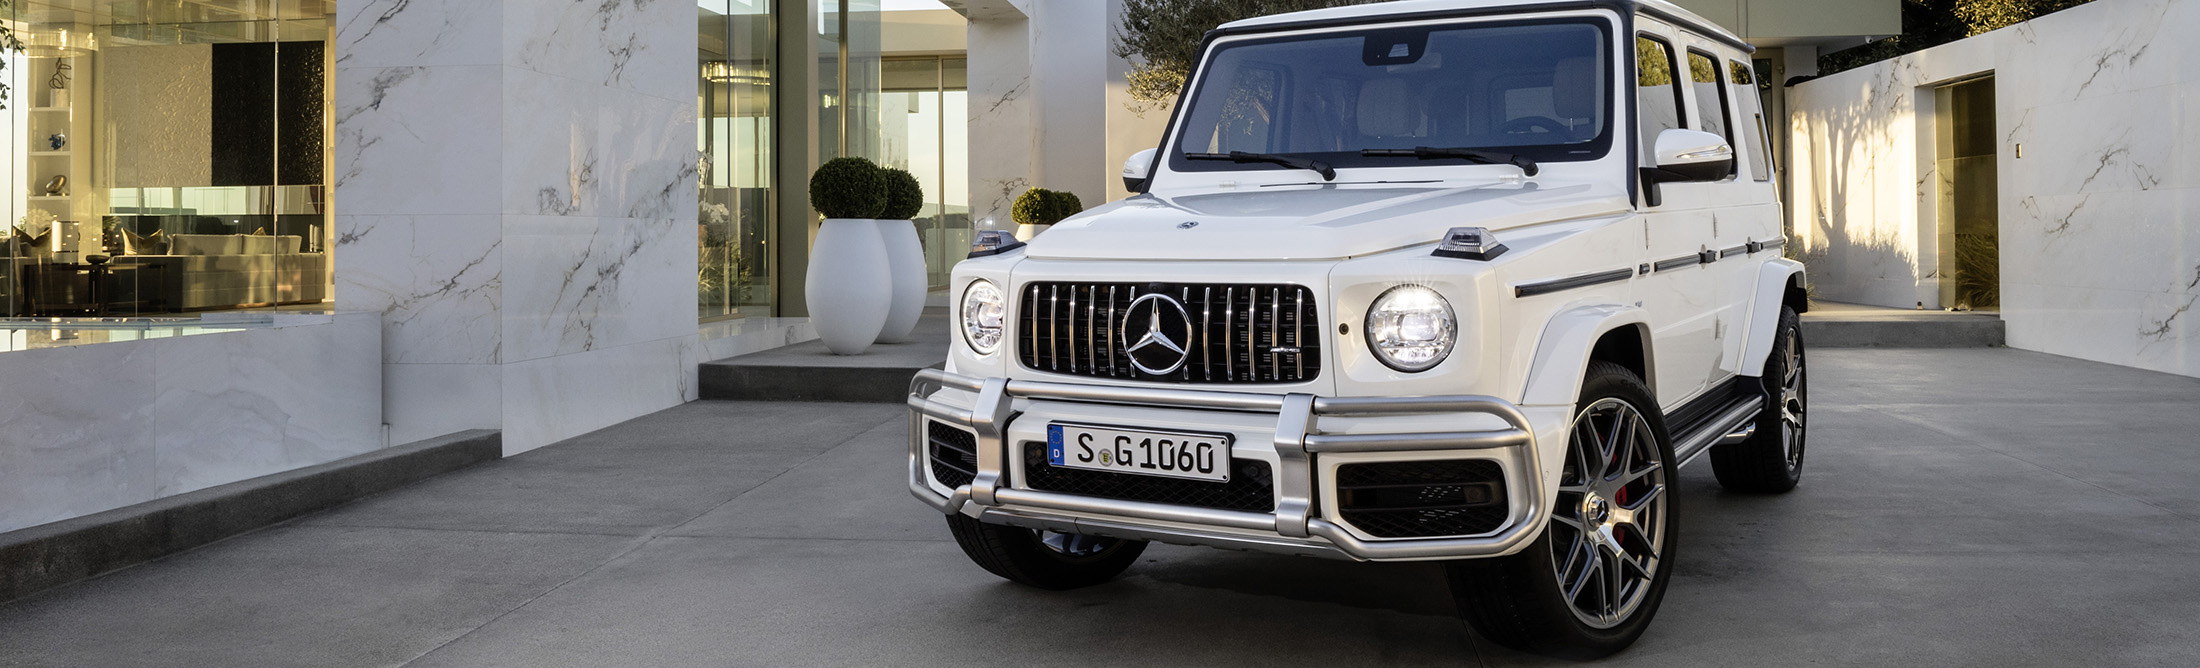 Want To Buy The New Mercedes G Wagen Here S What You Need